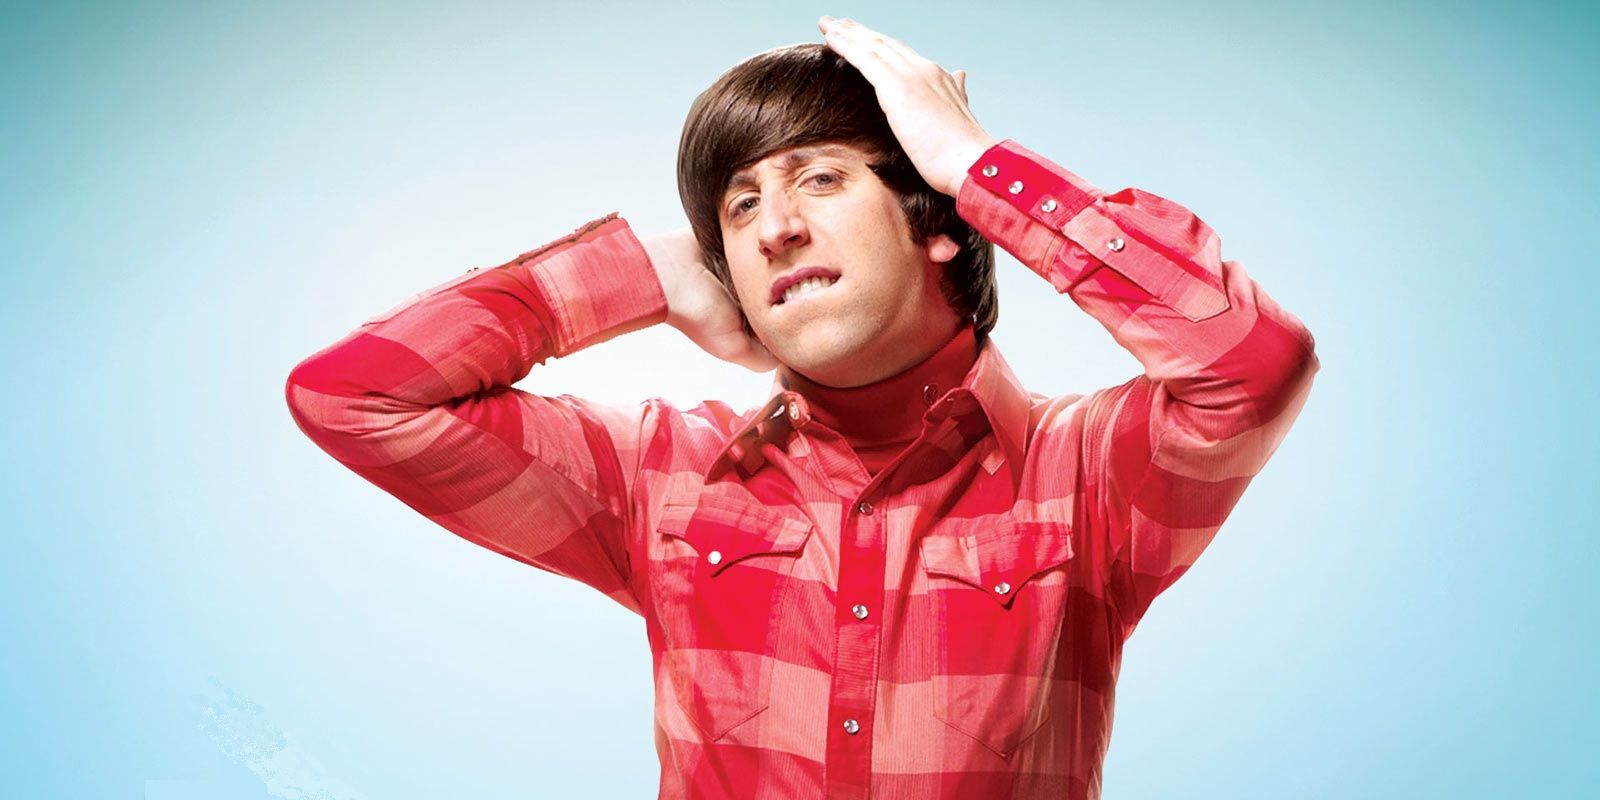 Howard Wolowitz combing his hair in a promo image for TBBT